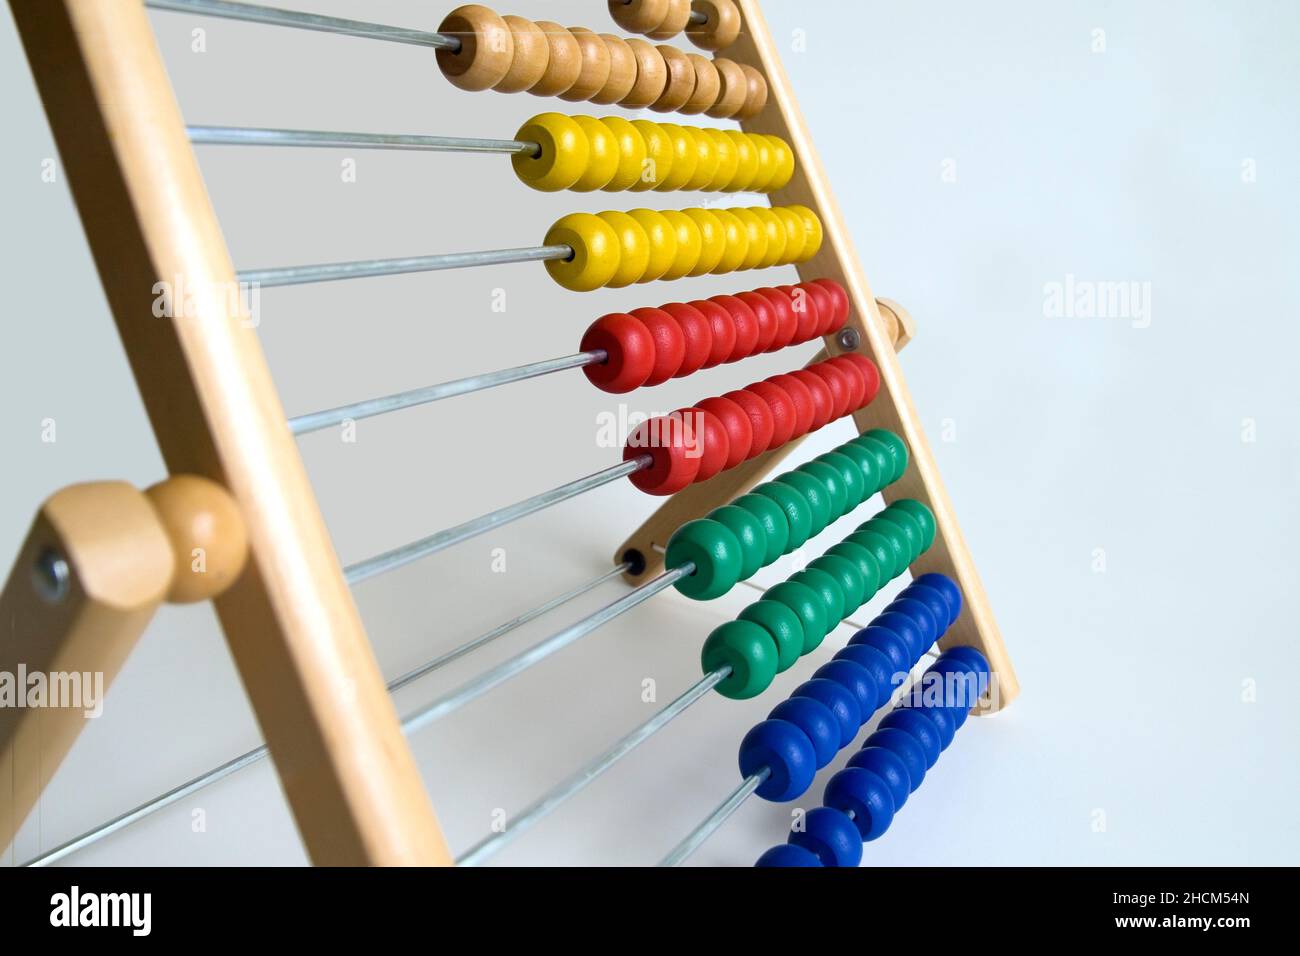 Wooden abacus toy Stock Photo